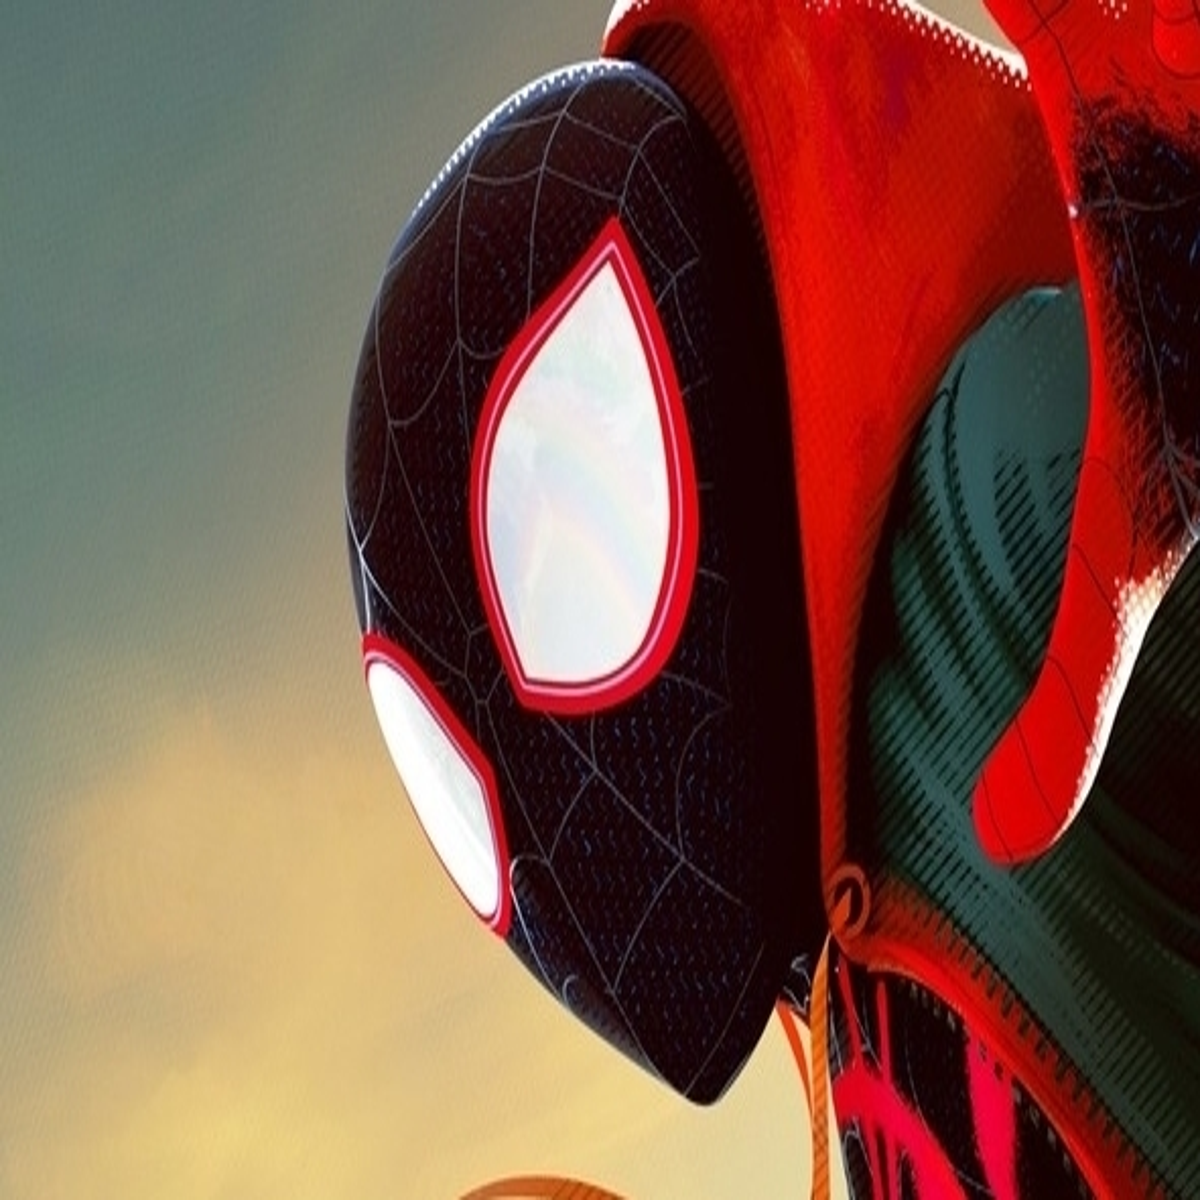 Sony Reveals Into The Spider-Verse Suit For Miles Morales Gaming Debut